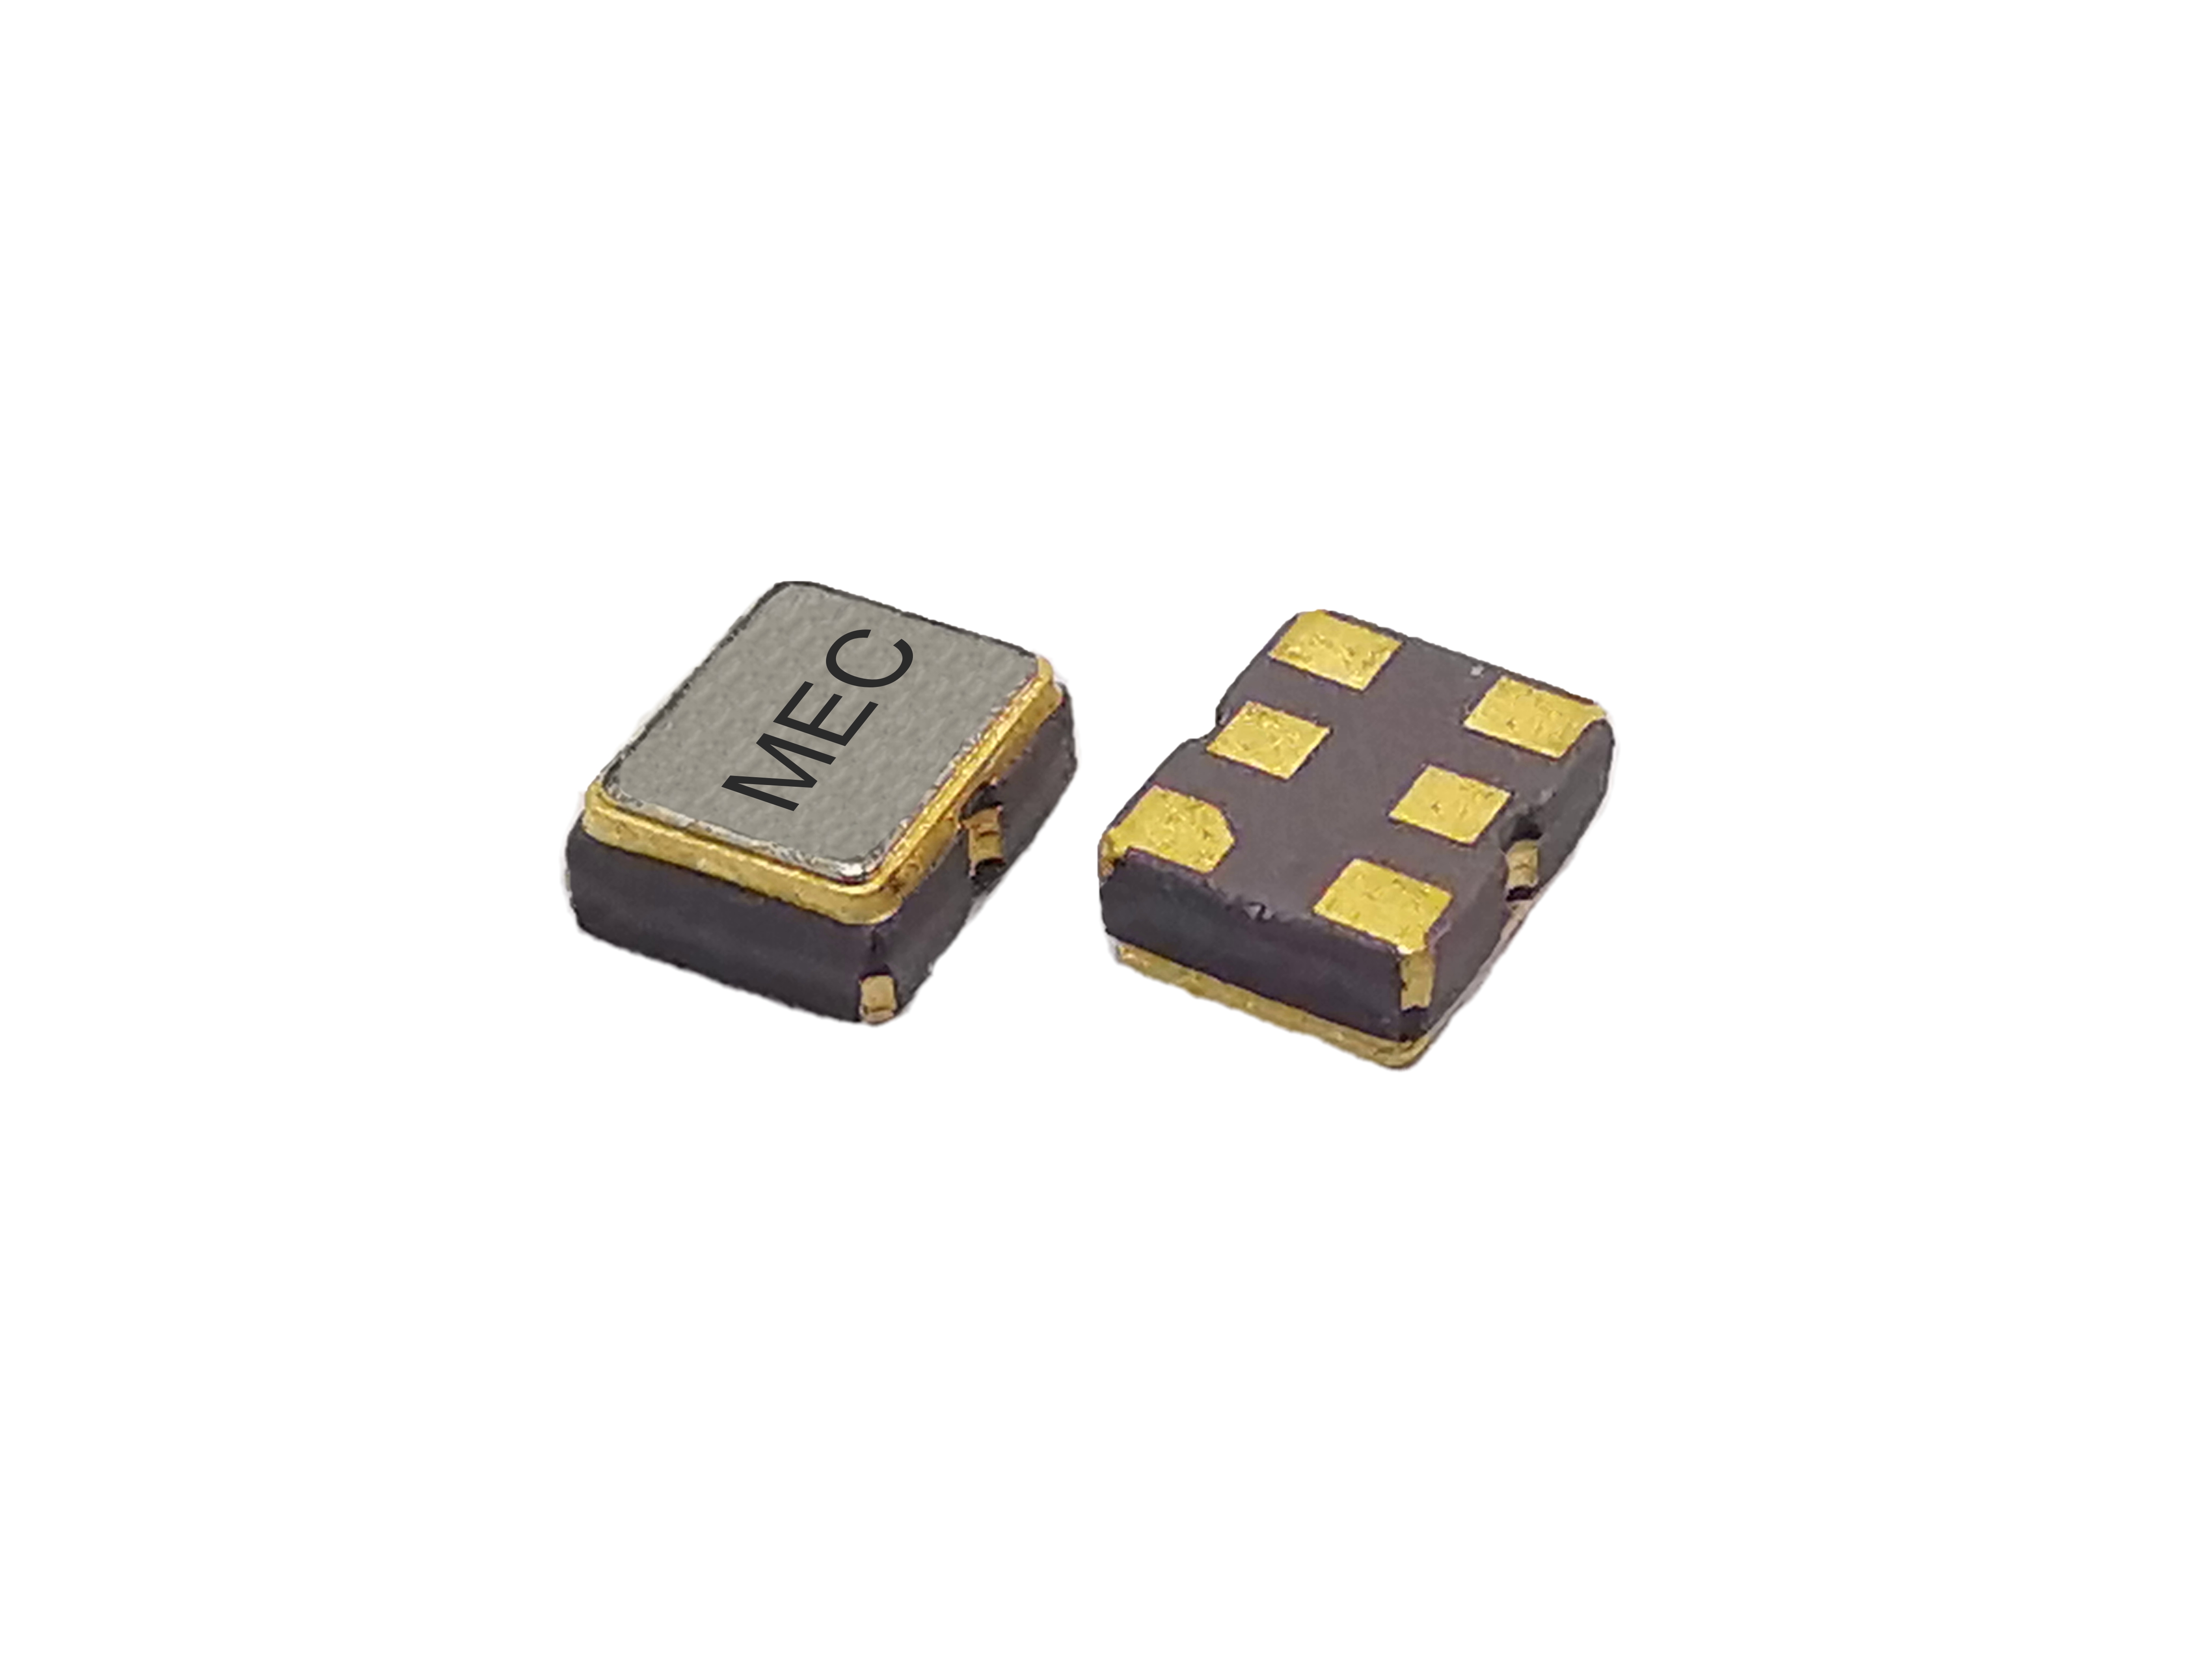 HPEK226 2520 3.3V Superb Phase Noise Differential With No PLL LVPECL SMD Crystal Oscillator